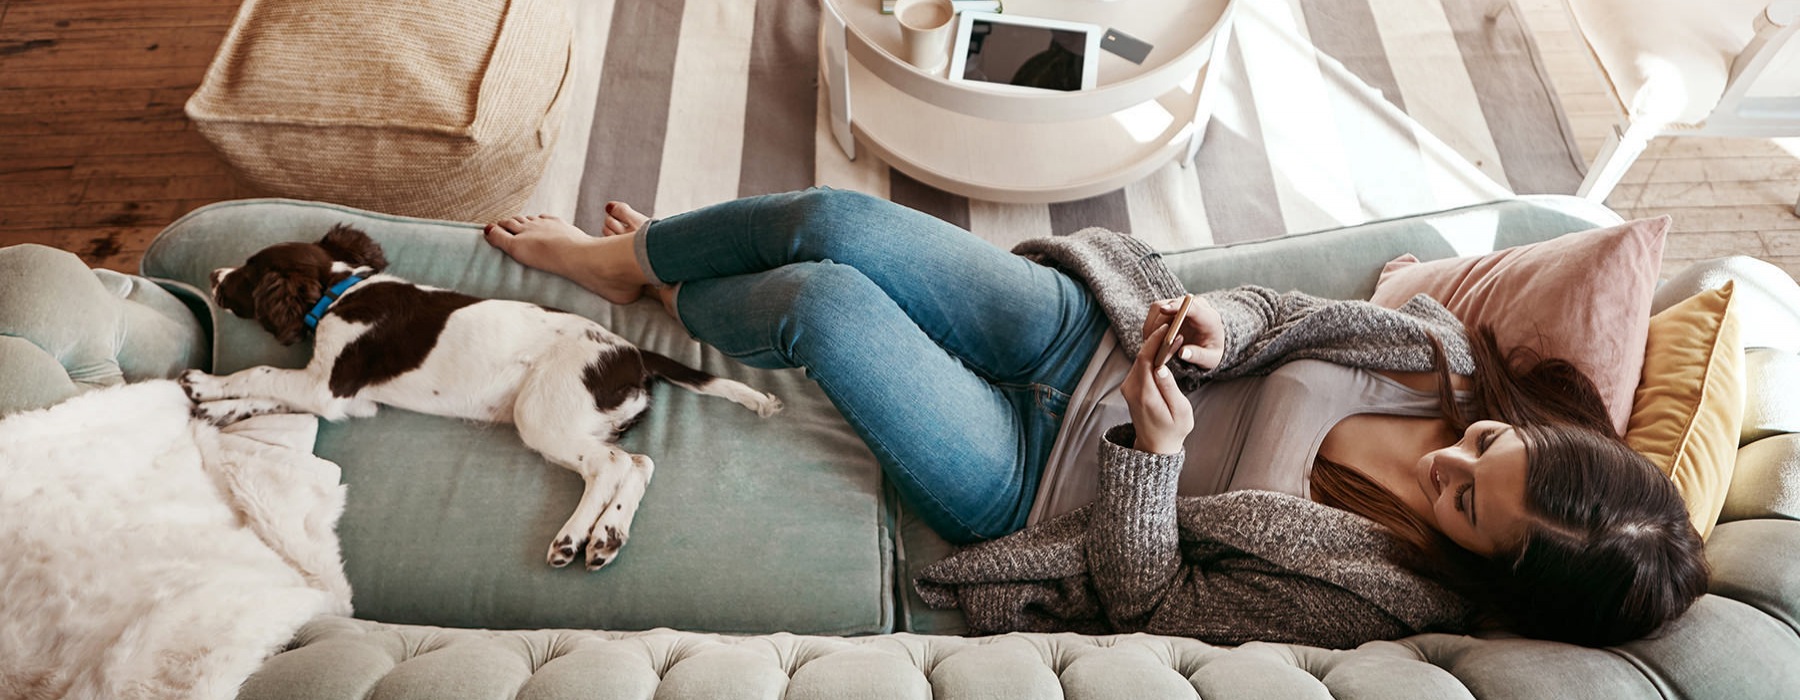 lifestyle image of a woman laying on a couch beside her pet